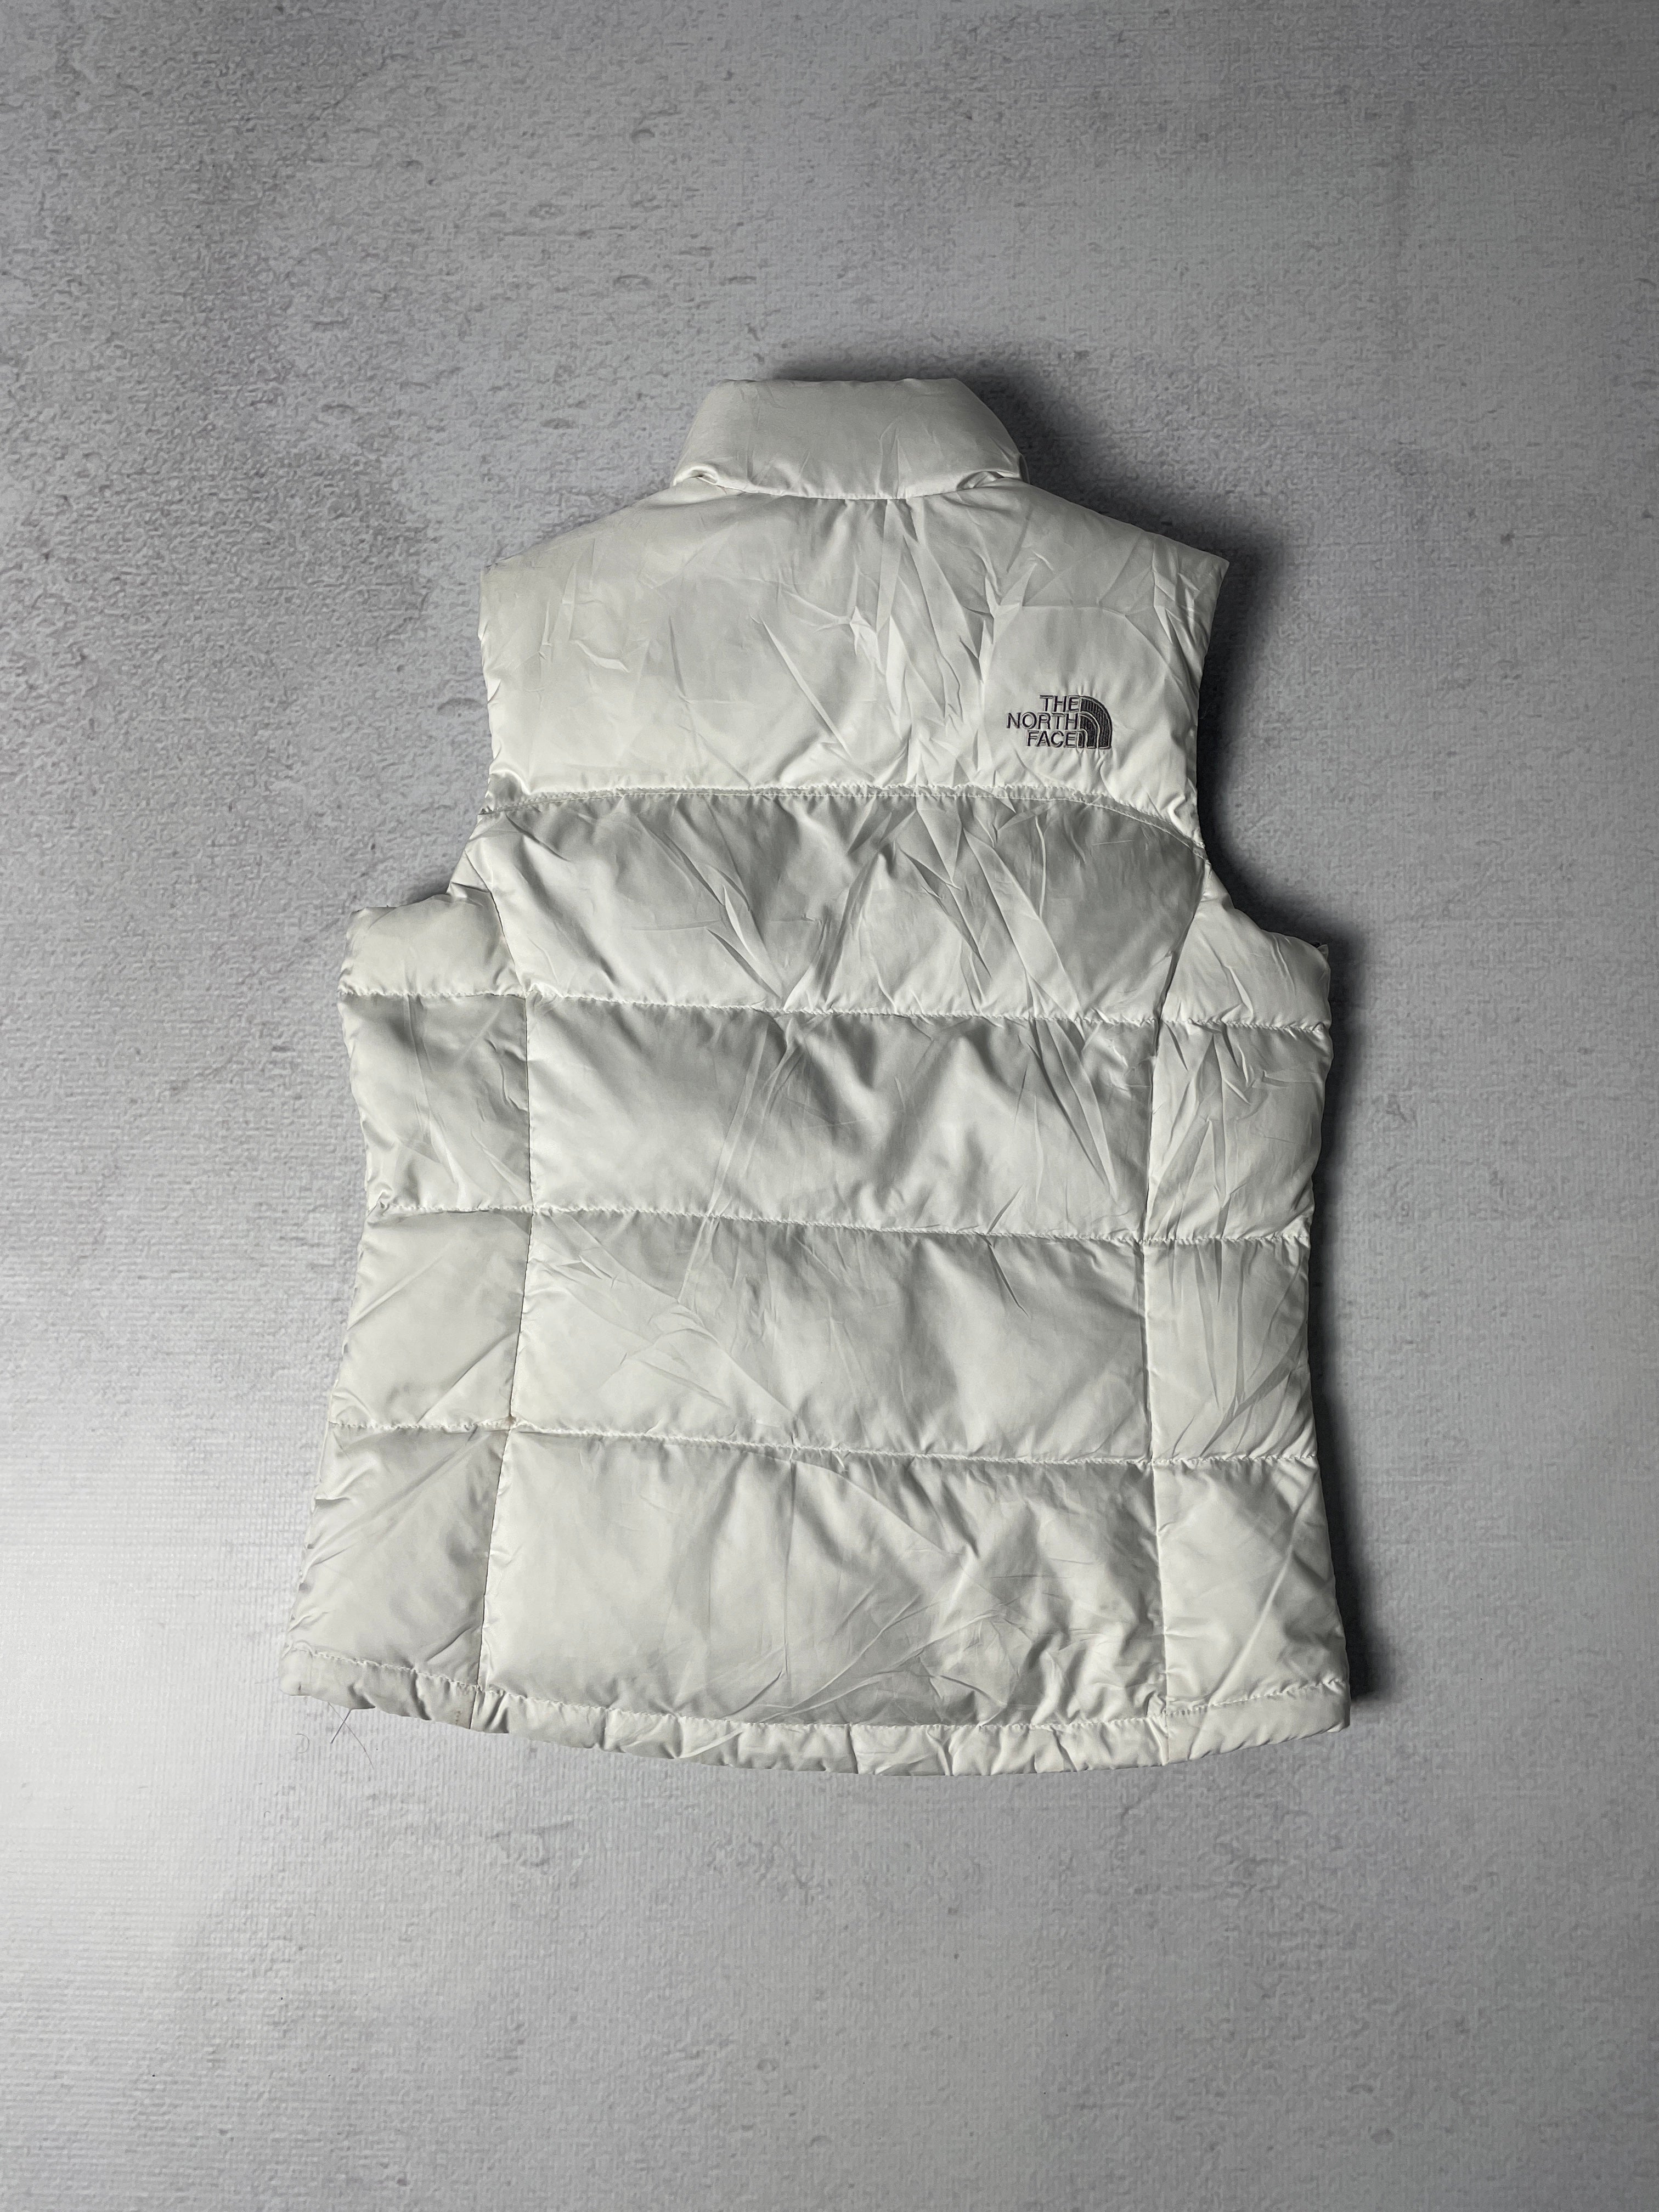 Vintage The North Face 700 Series Nuptse Puffer Vest - Women's Small